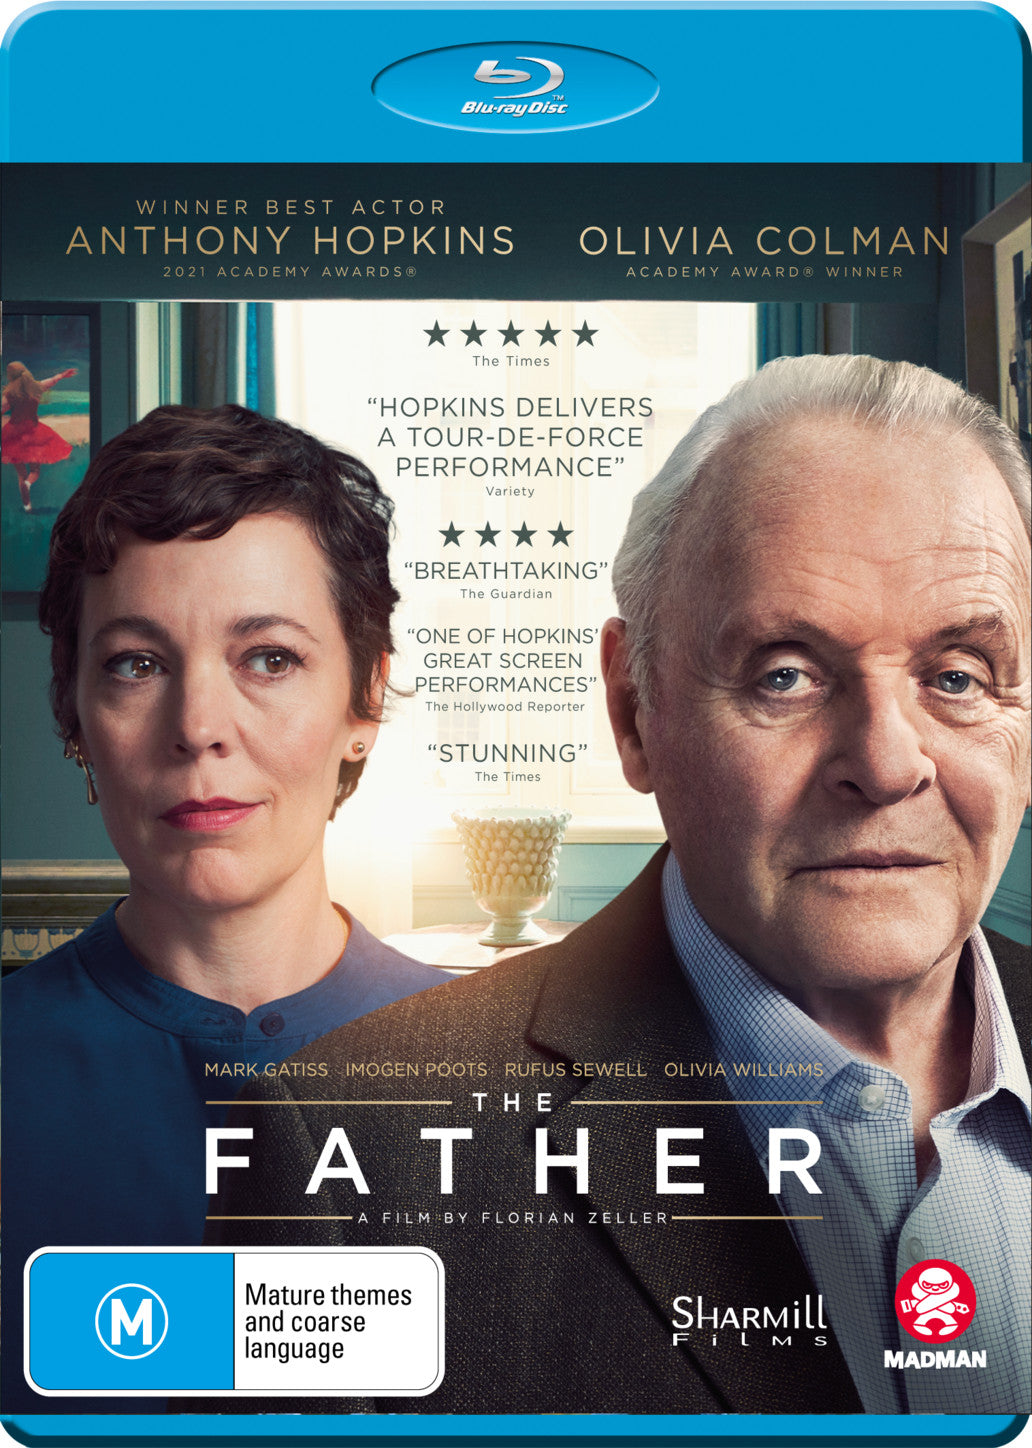 THE FATHER (AUS) (BLU-RAY)